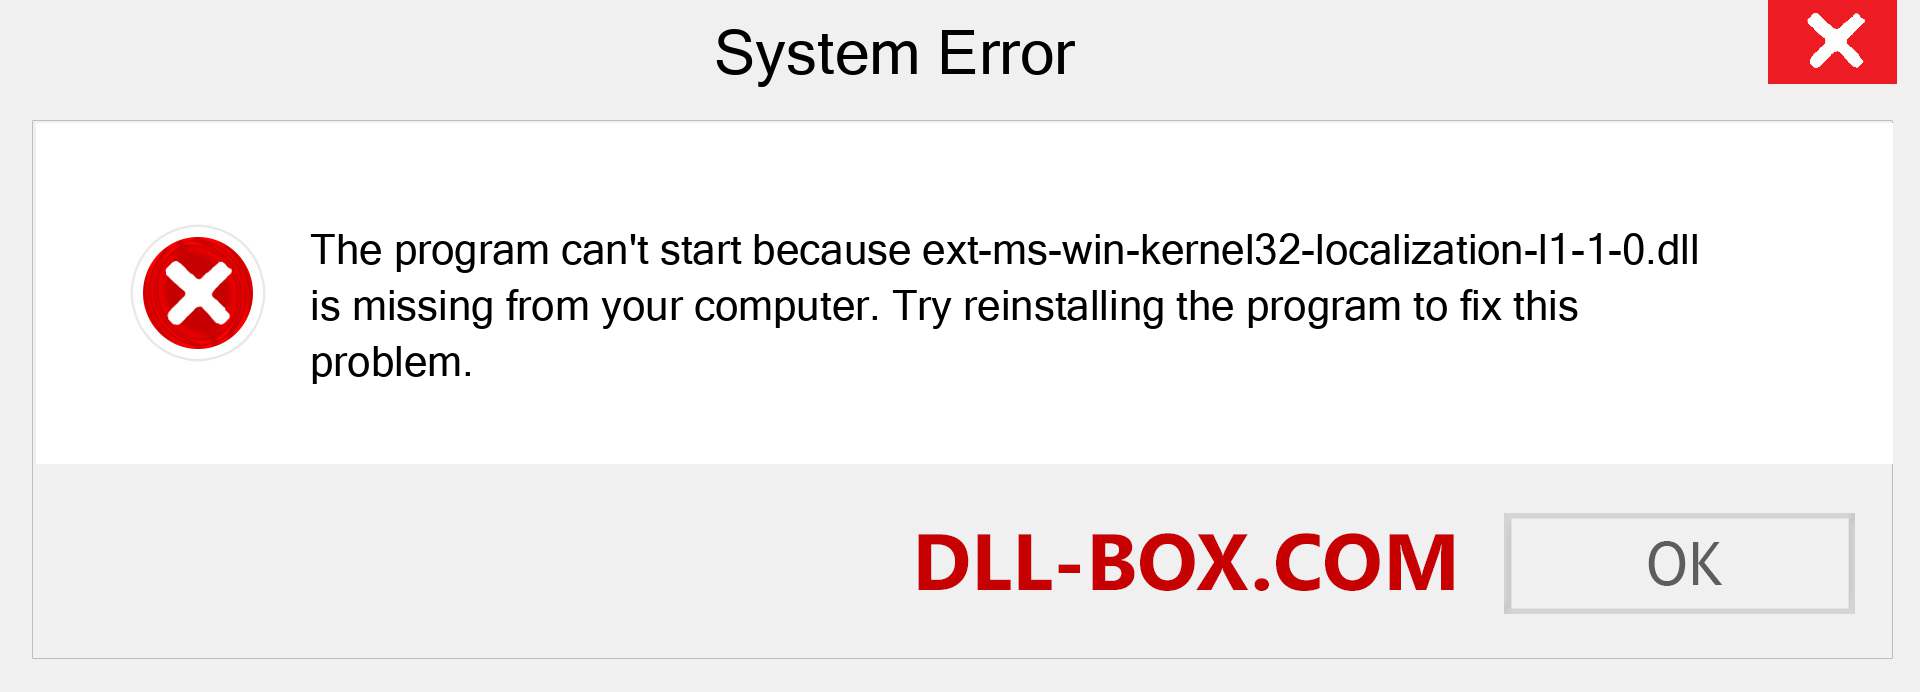  ext-ms-win-kernel32-localization-l1-1-0.dll file is missing?. Download for Windows 7, 8, 10 - Fix  ext-ms-win-kernel32-localization-l1-1-0 dll Missing Error on Windows, photos, images